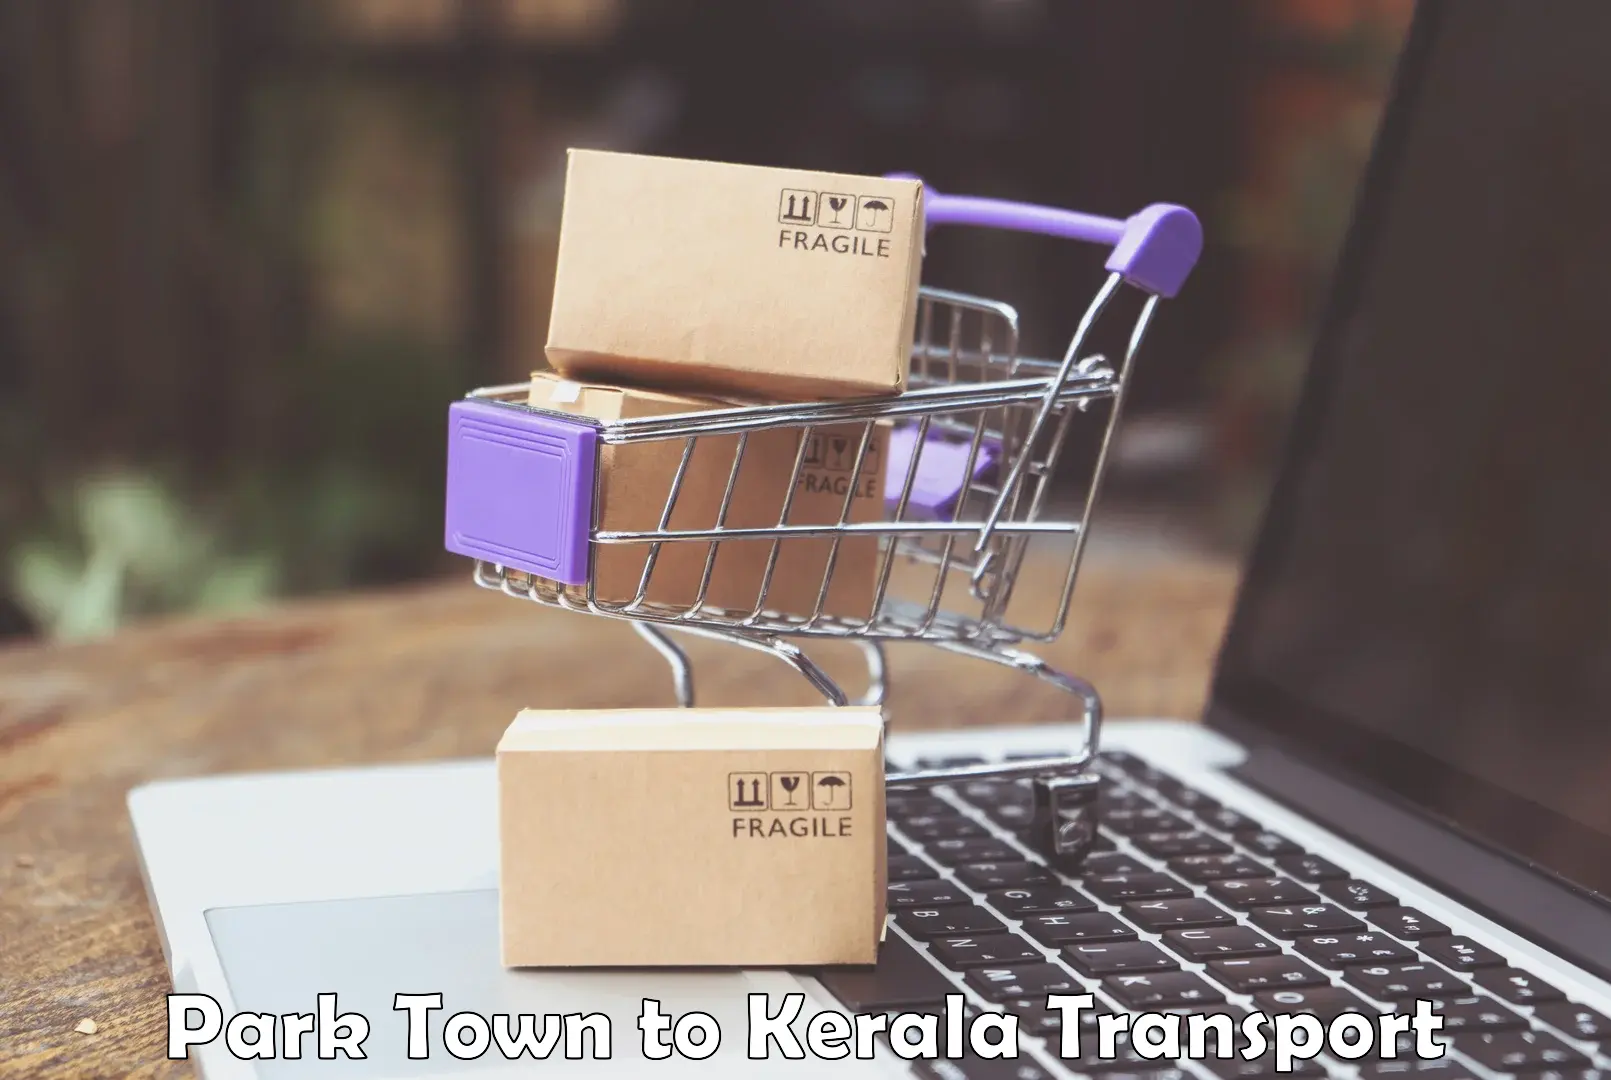 Cargo transport services Park Town to Kerala